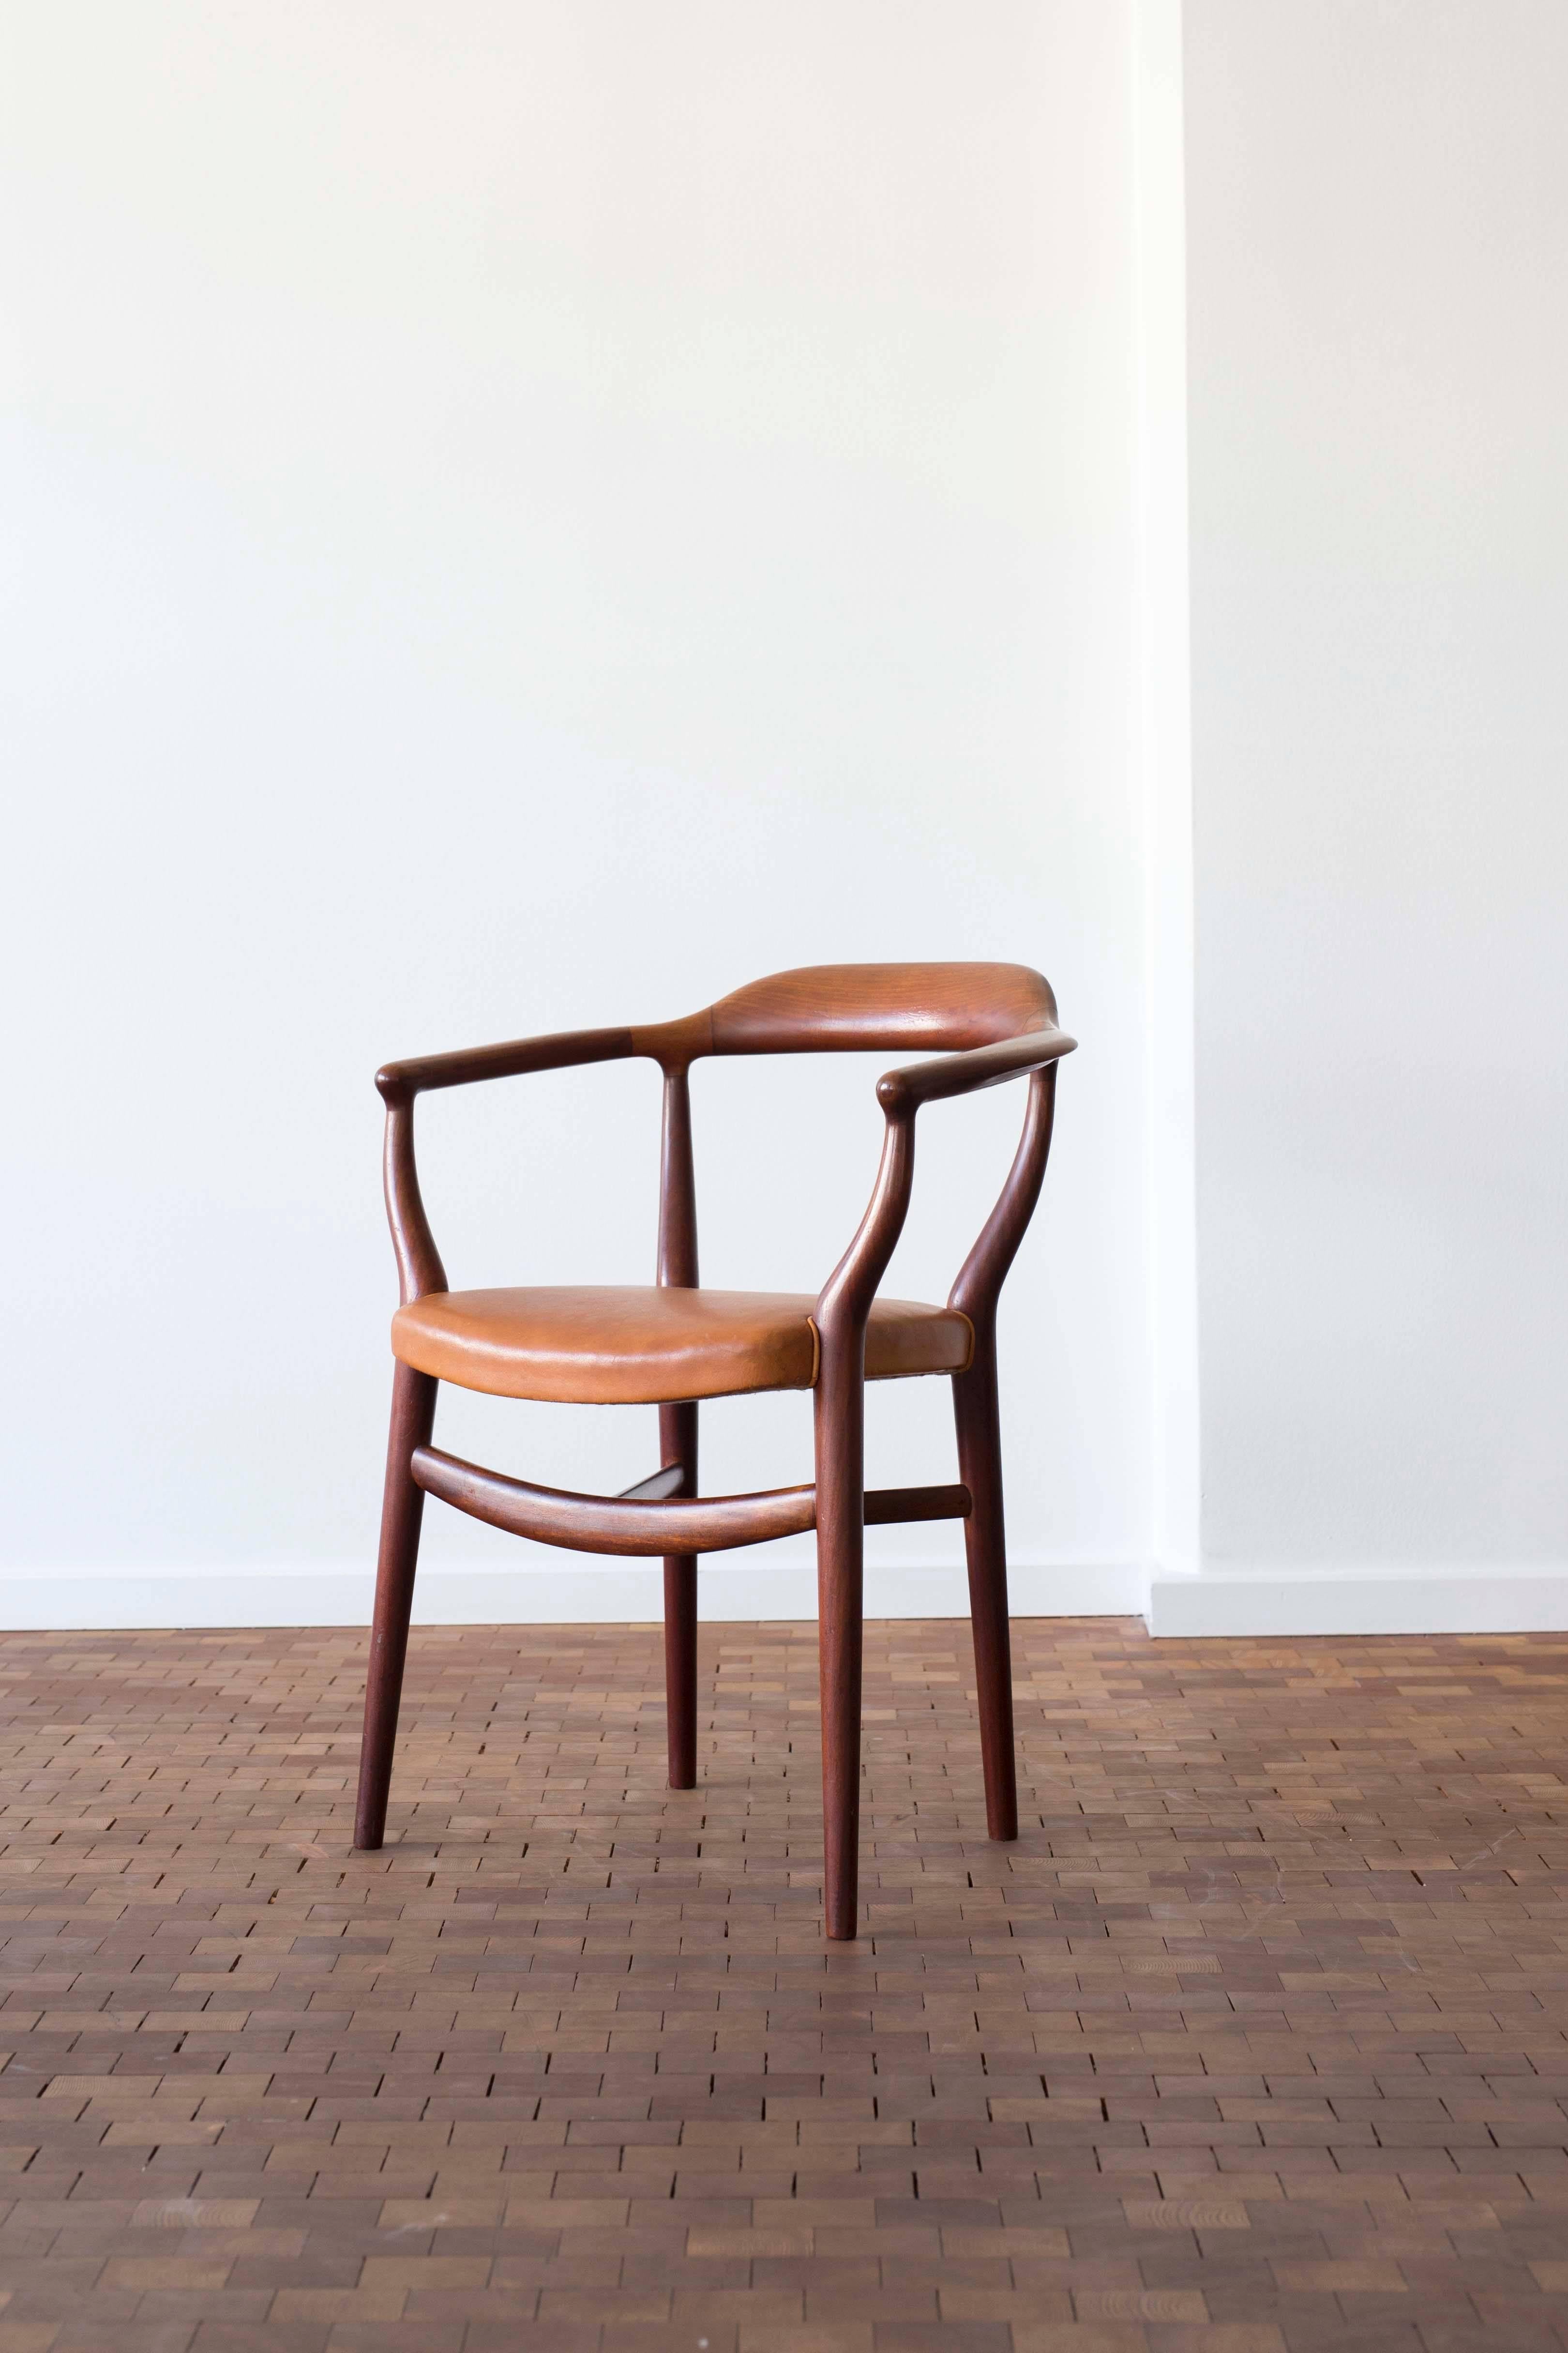 Rare sculptural Finn Juhl NV44 armchair with frame of cuban mahogany and seat upholstered with patinated leather. 

Designed by Finn Juhl 1944, executed by cabinetmaker Niels Vodder, Denmark. 

From the production of 12 chairs. 

Very fine